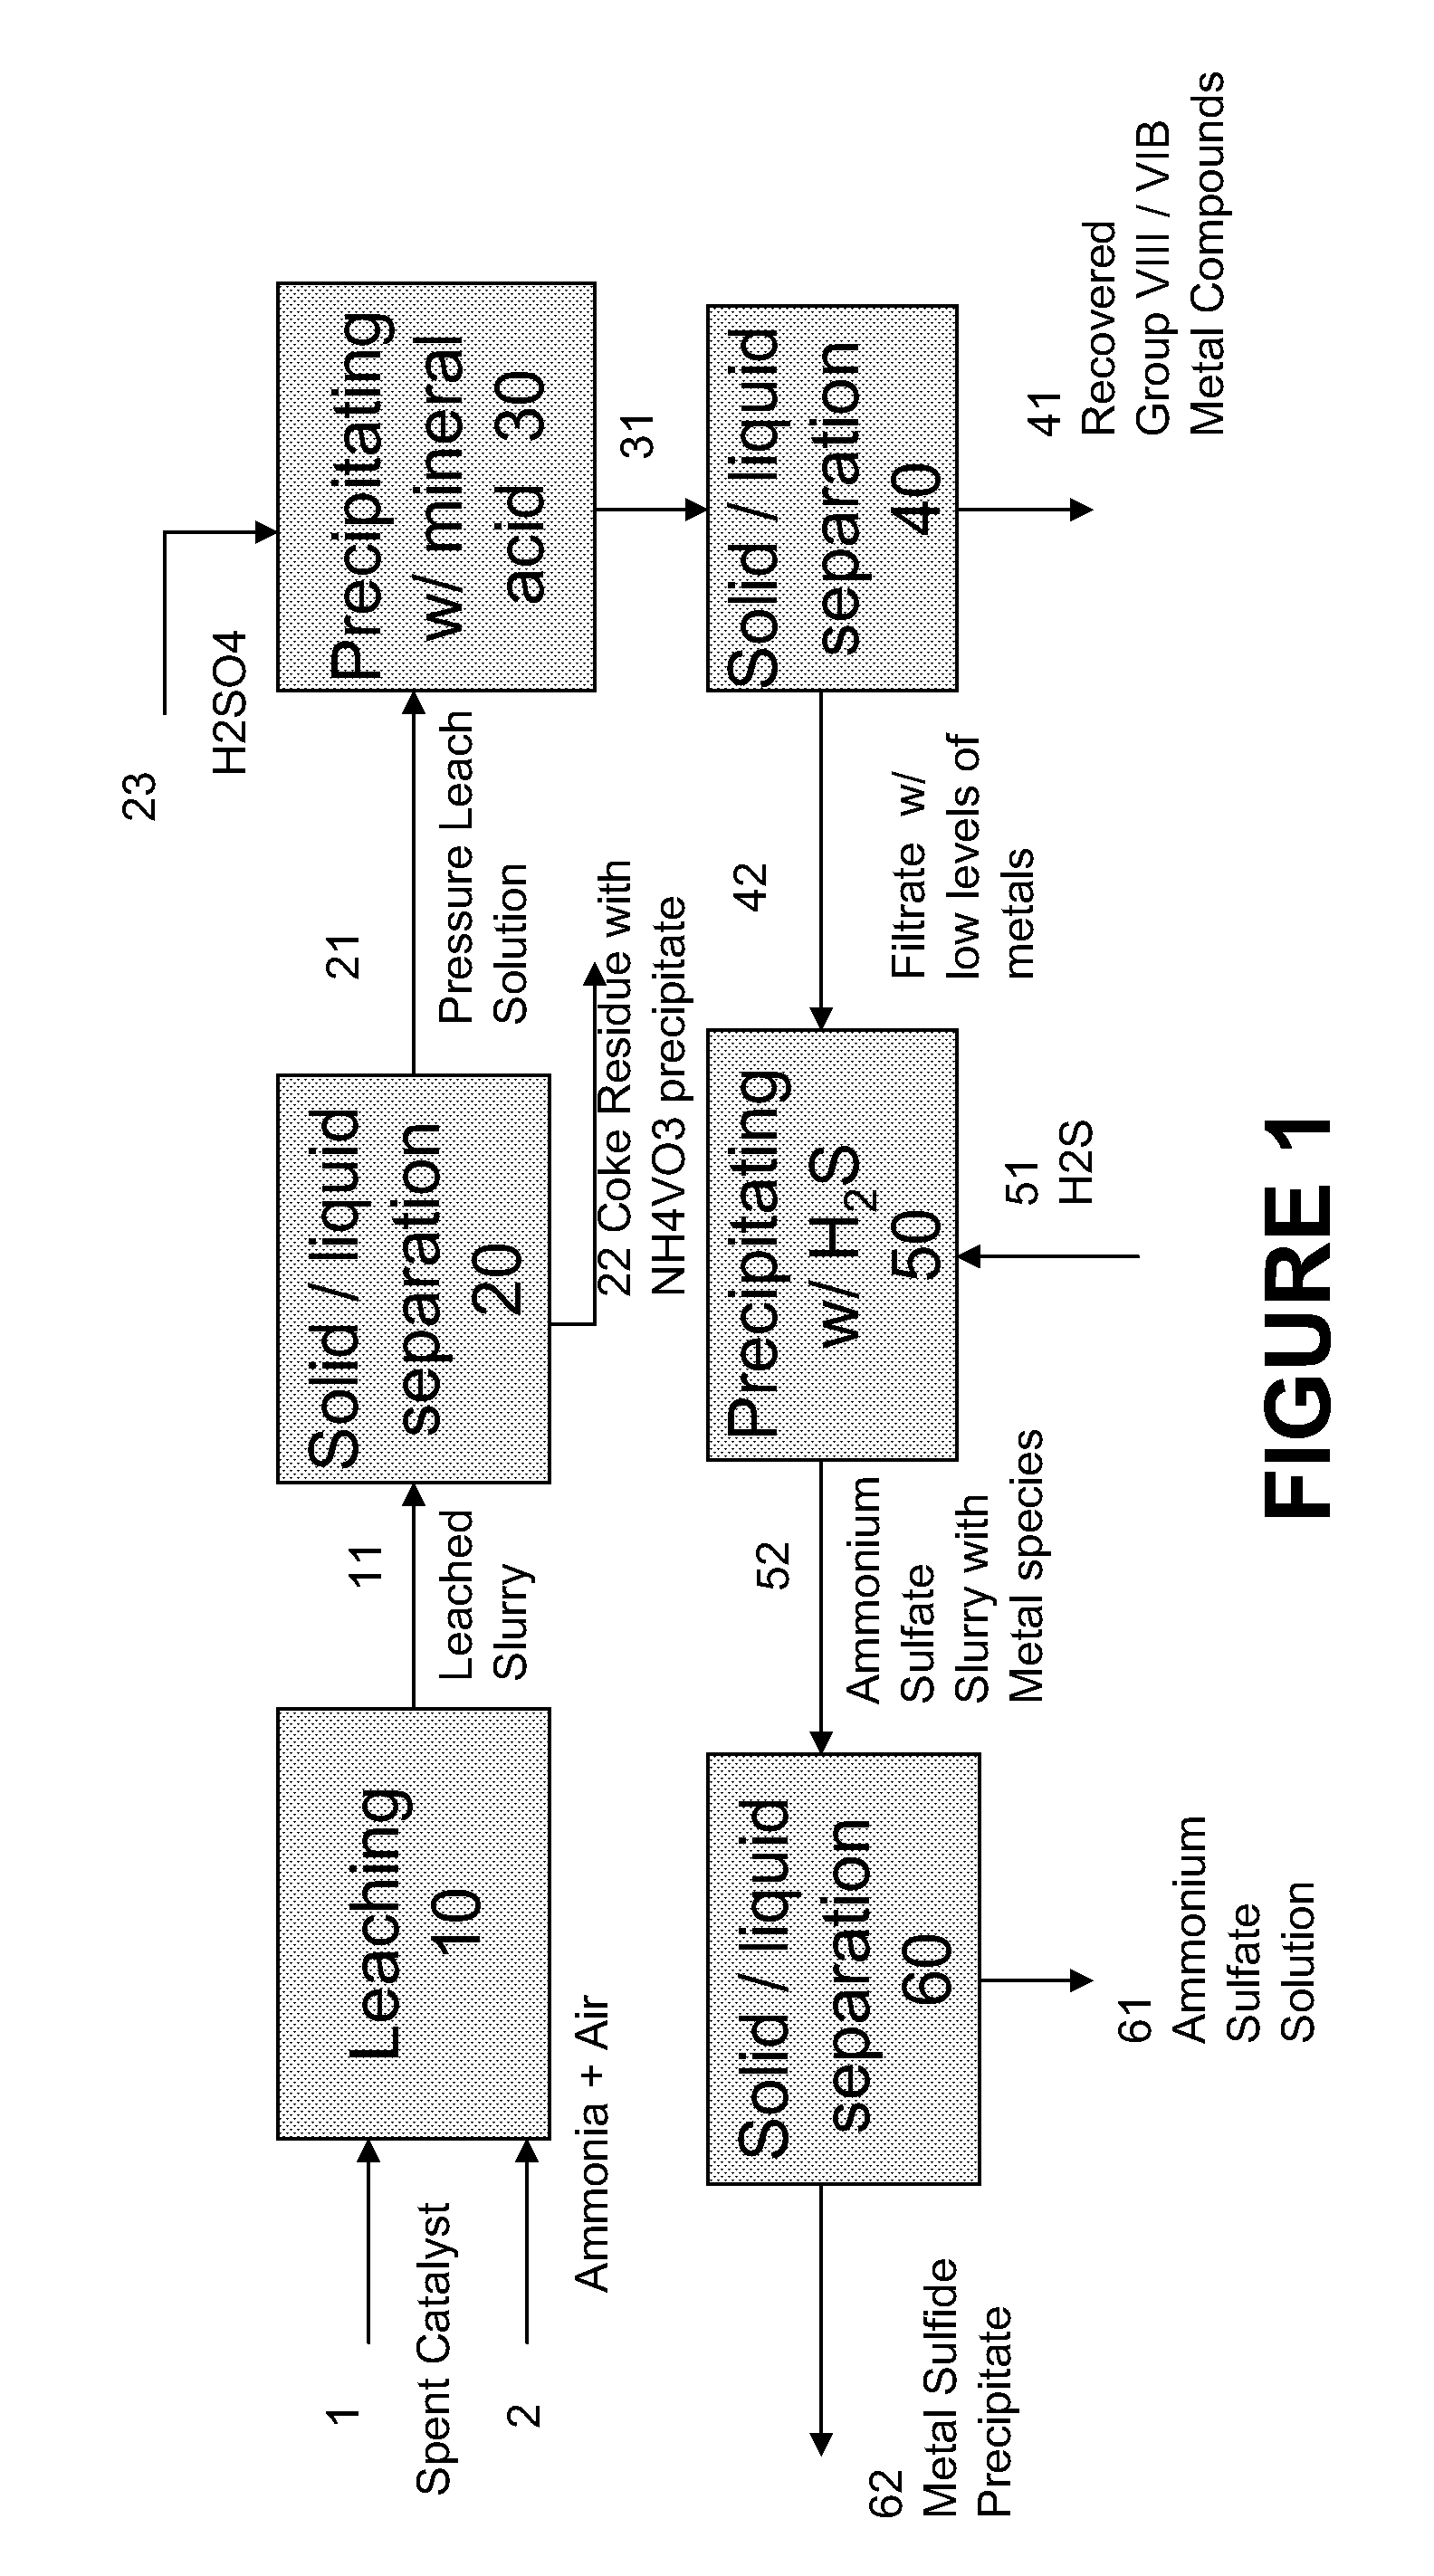 Process for Recovering Base Metals from Spent Hydroprocessing Catalyst